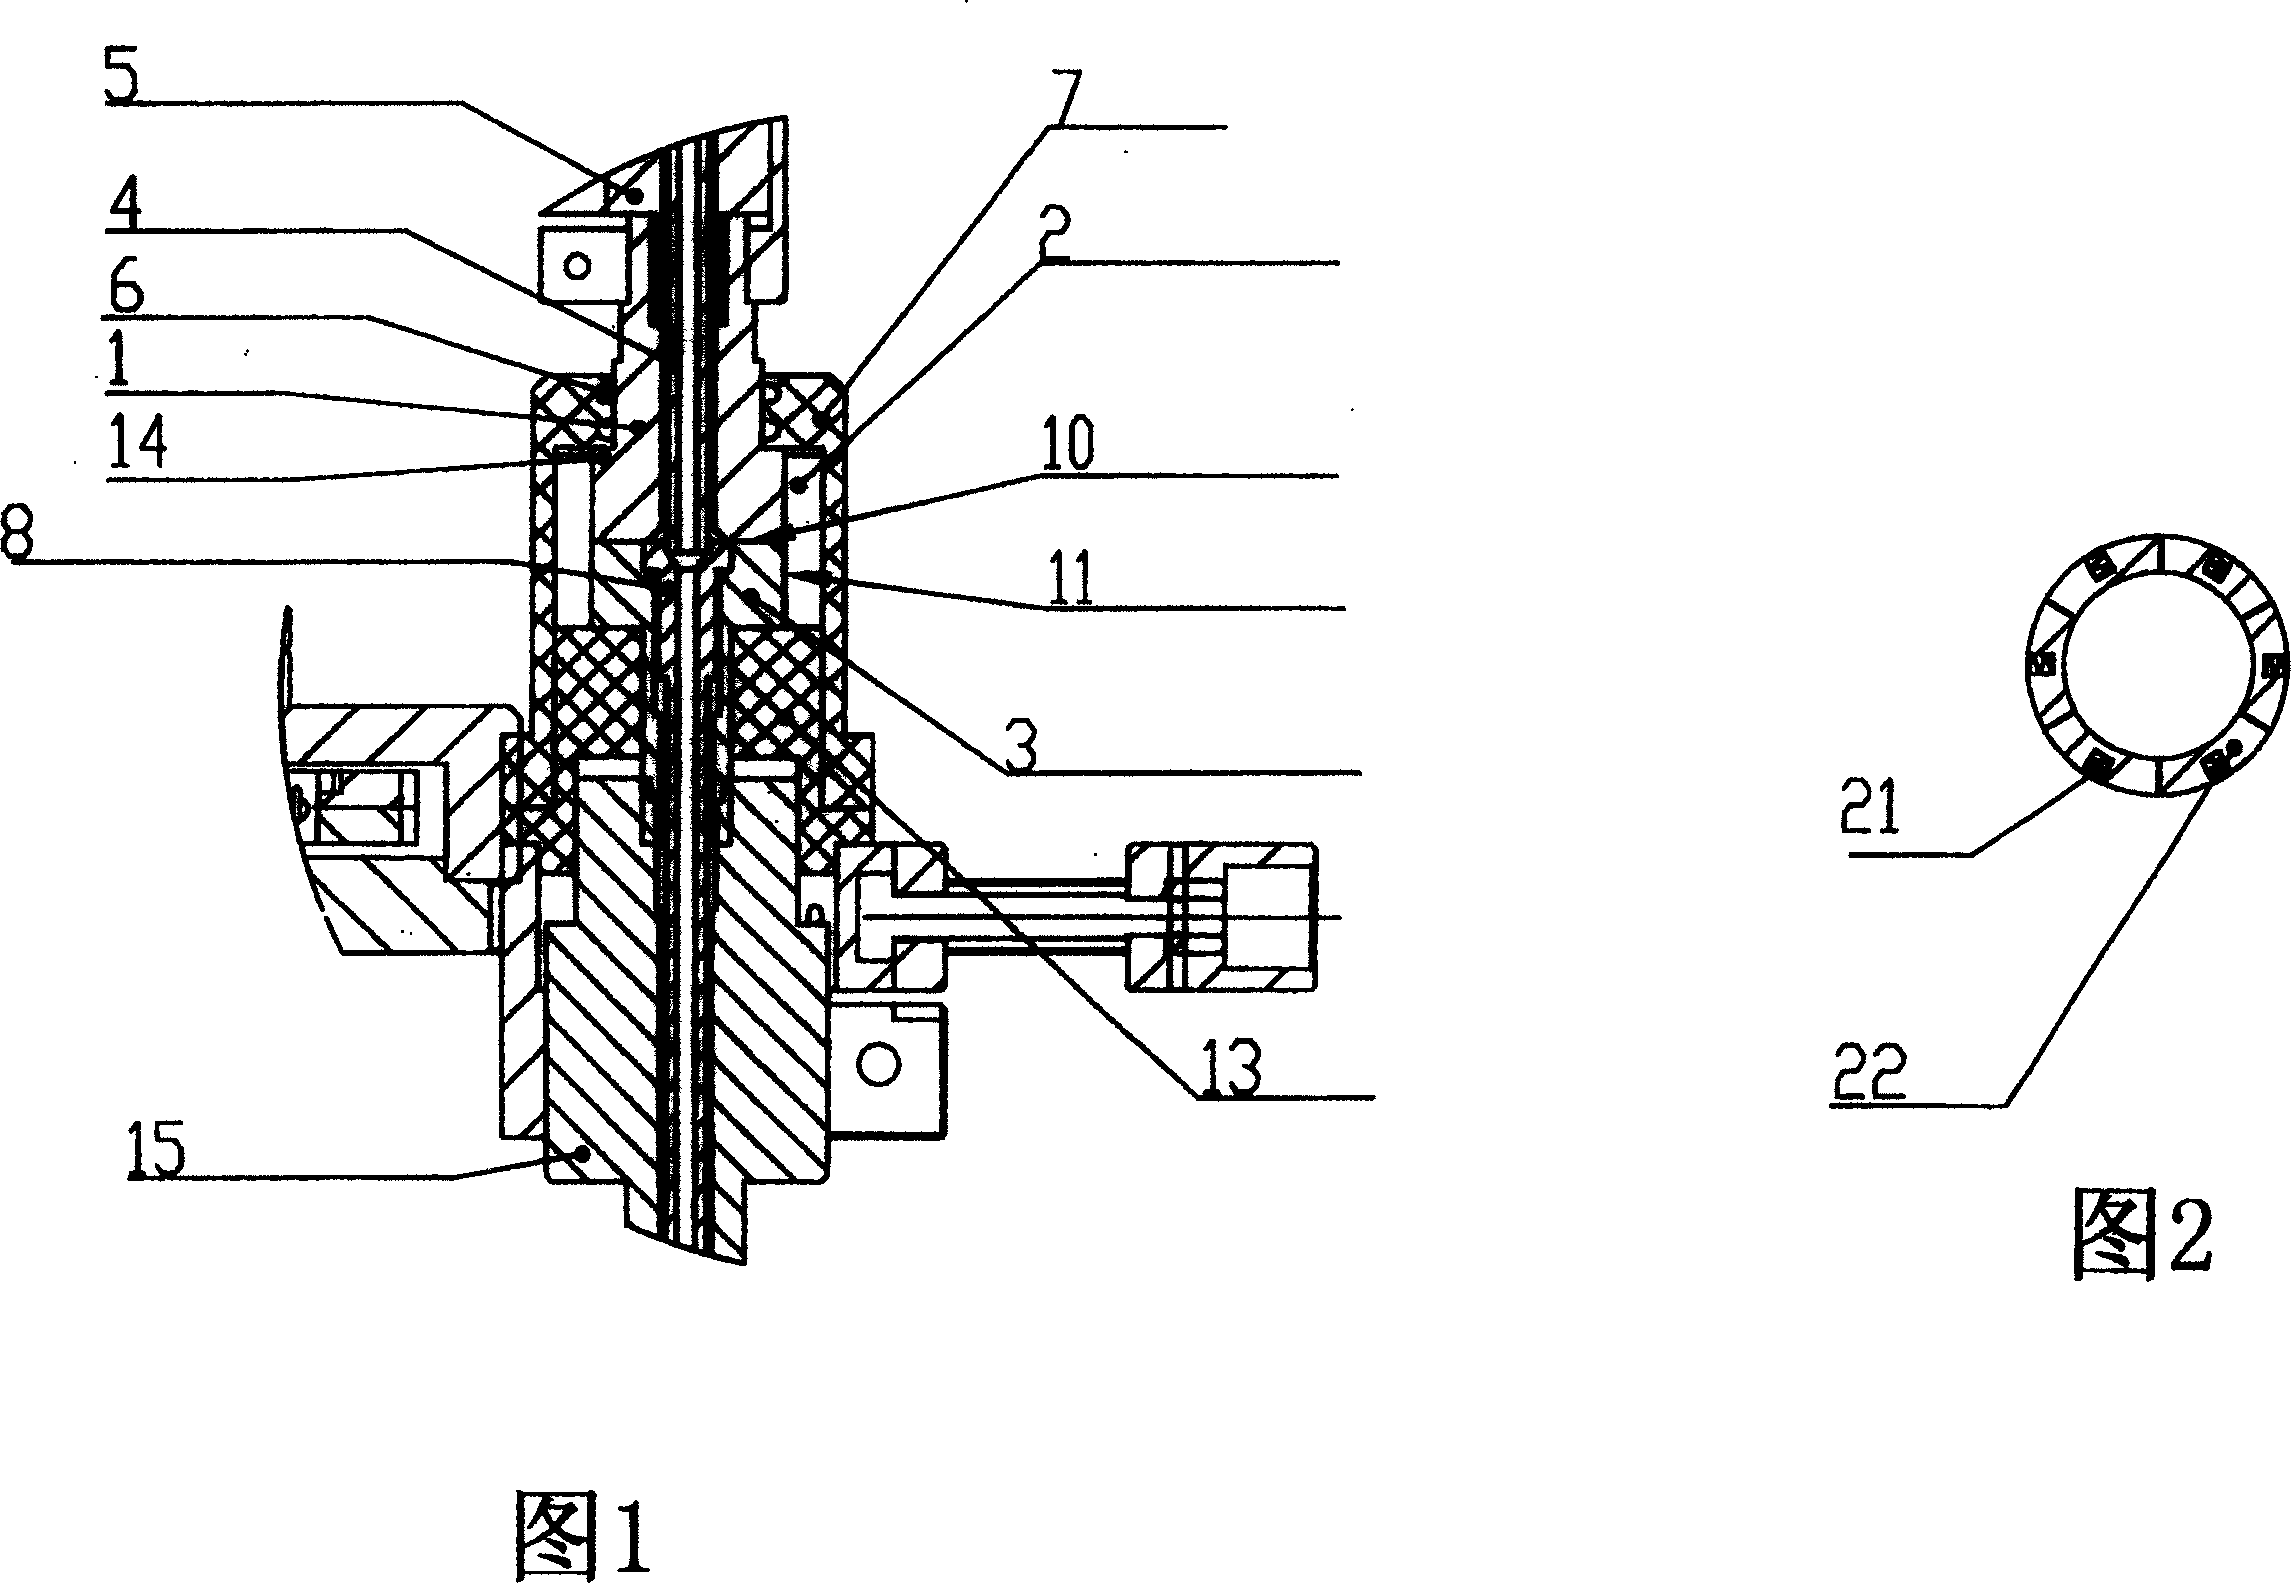 Welding torch cable self-rototing device